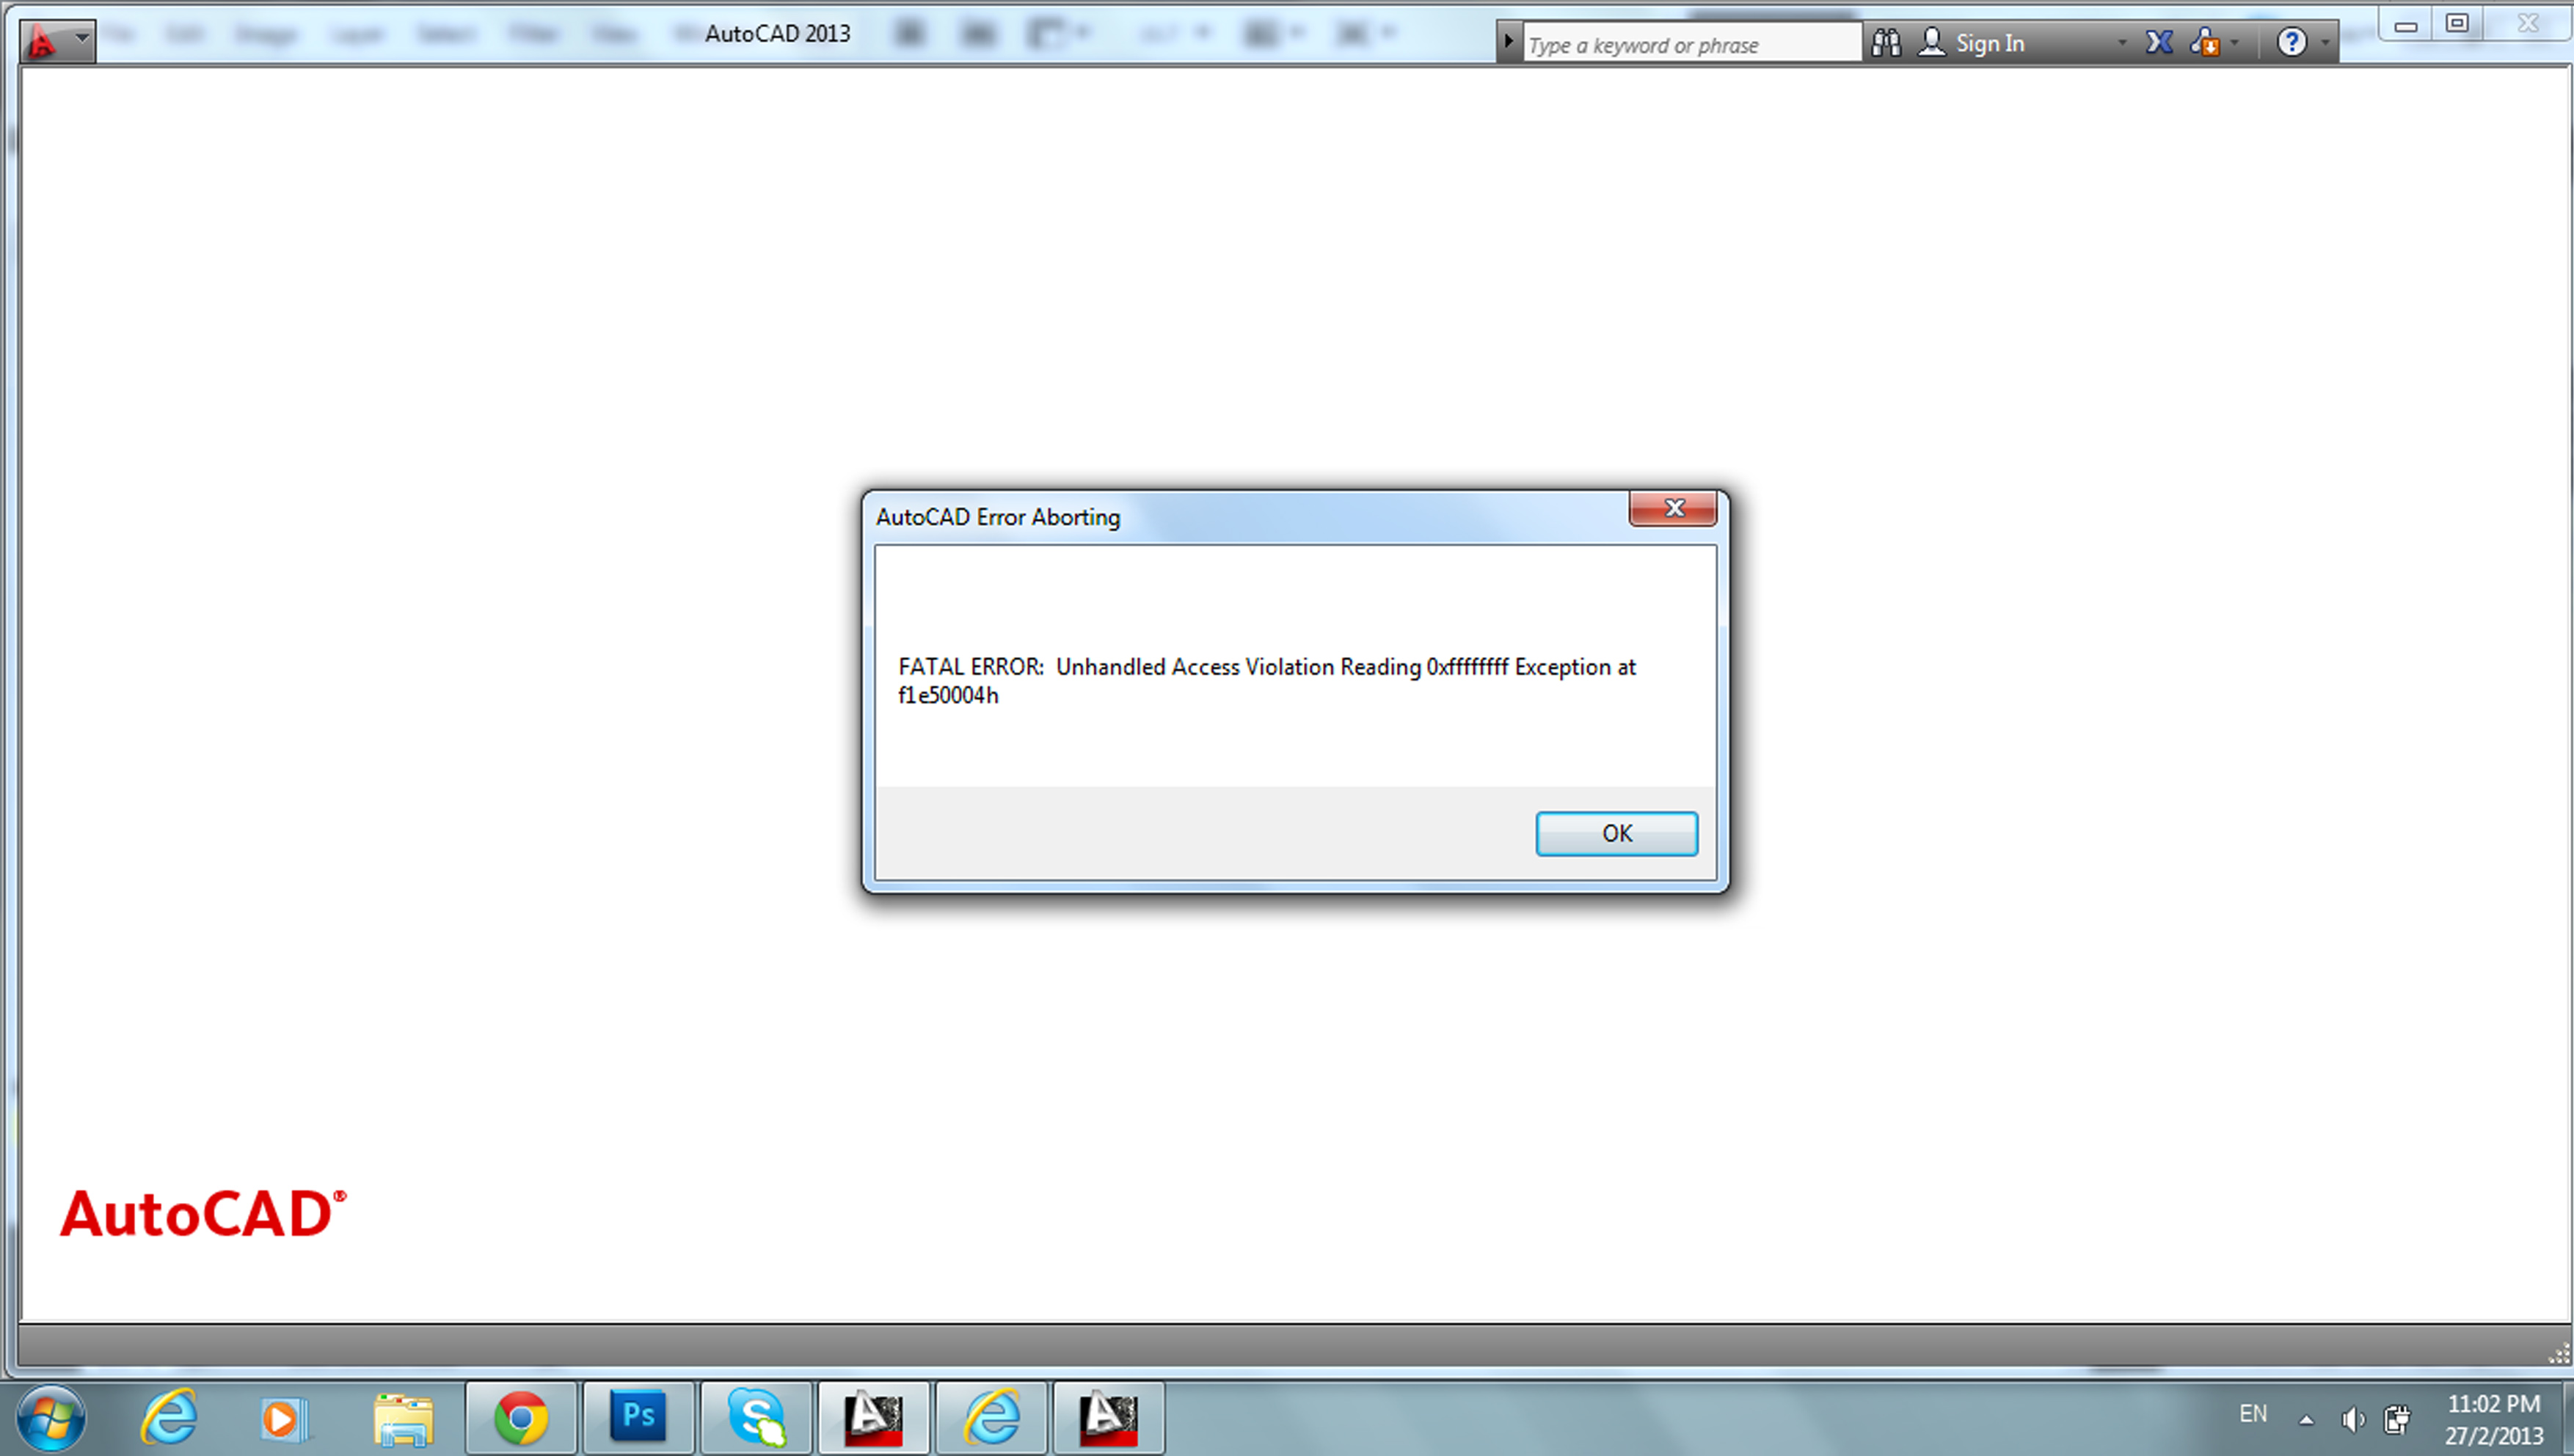 autocad the year 2013 fatal error unhandled access ticket reading 0x0000 exception